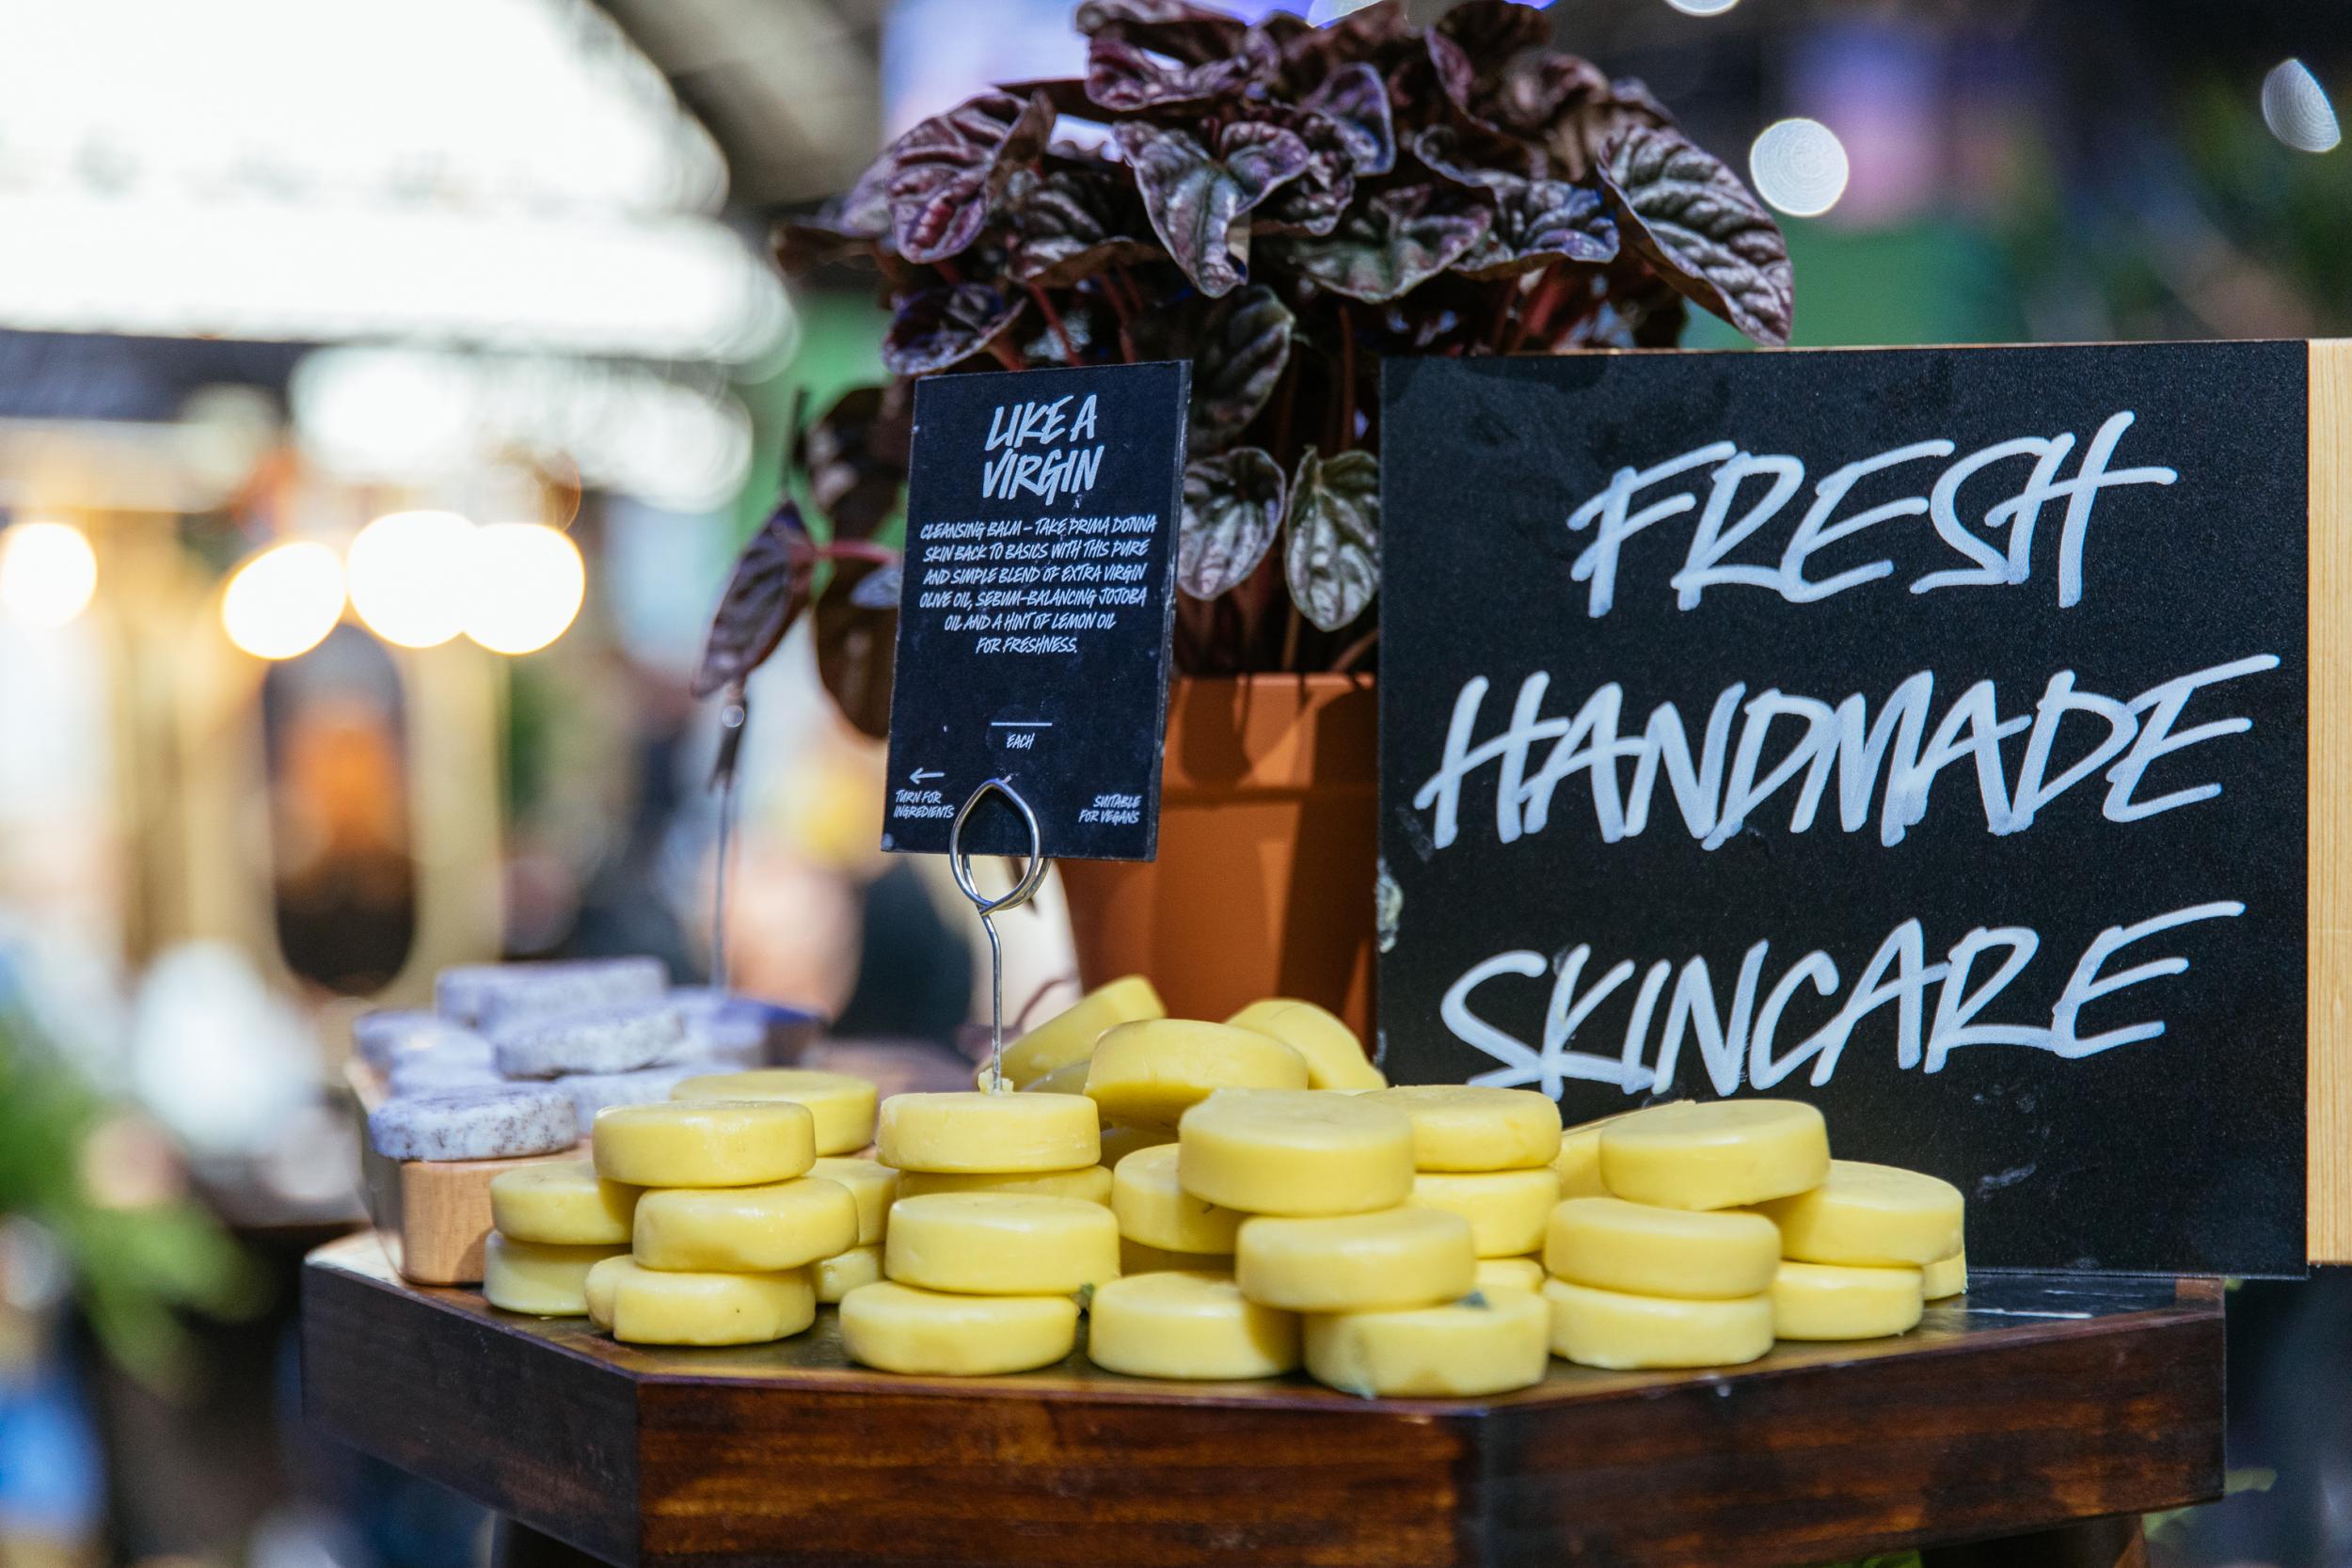 Lush launches first Lush Naked store in the UK